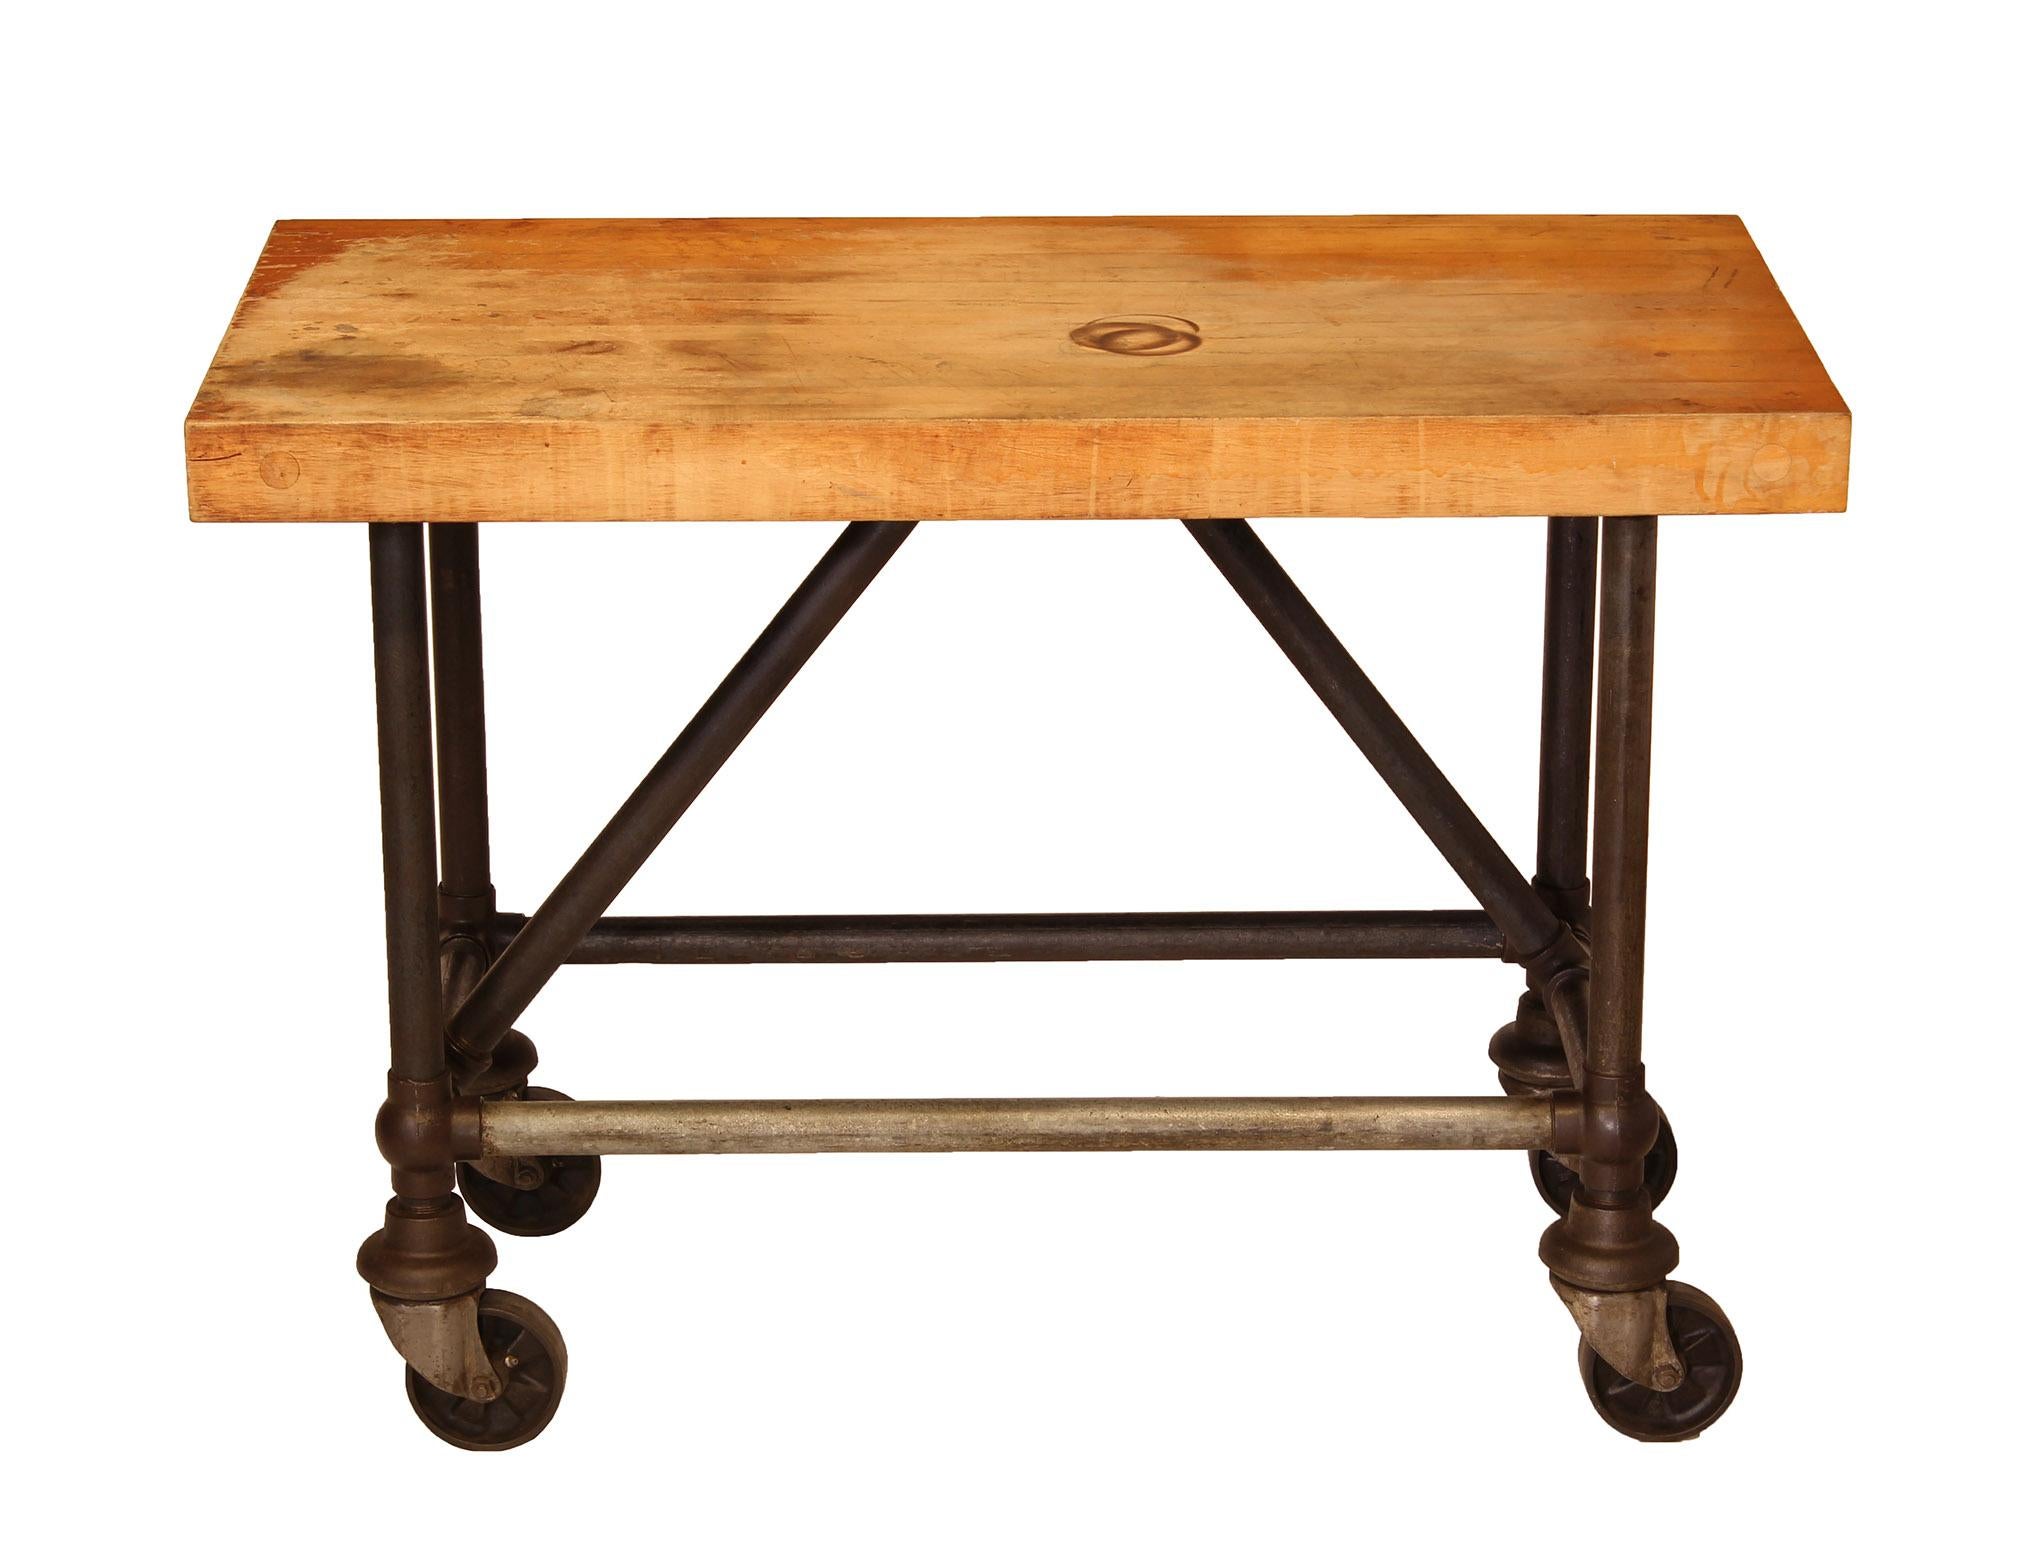 Heavy duty butcher block / bar cart made with industrial cast iron pipe legs, and unique round joints with industrial casters. Overall in great condition with some wear. Dimensions: Overall width 48